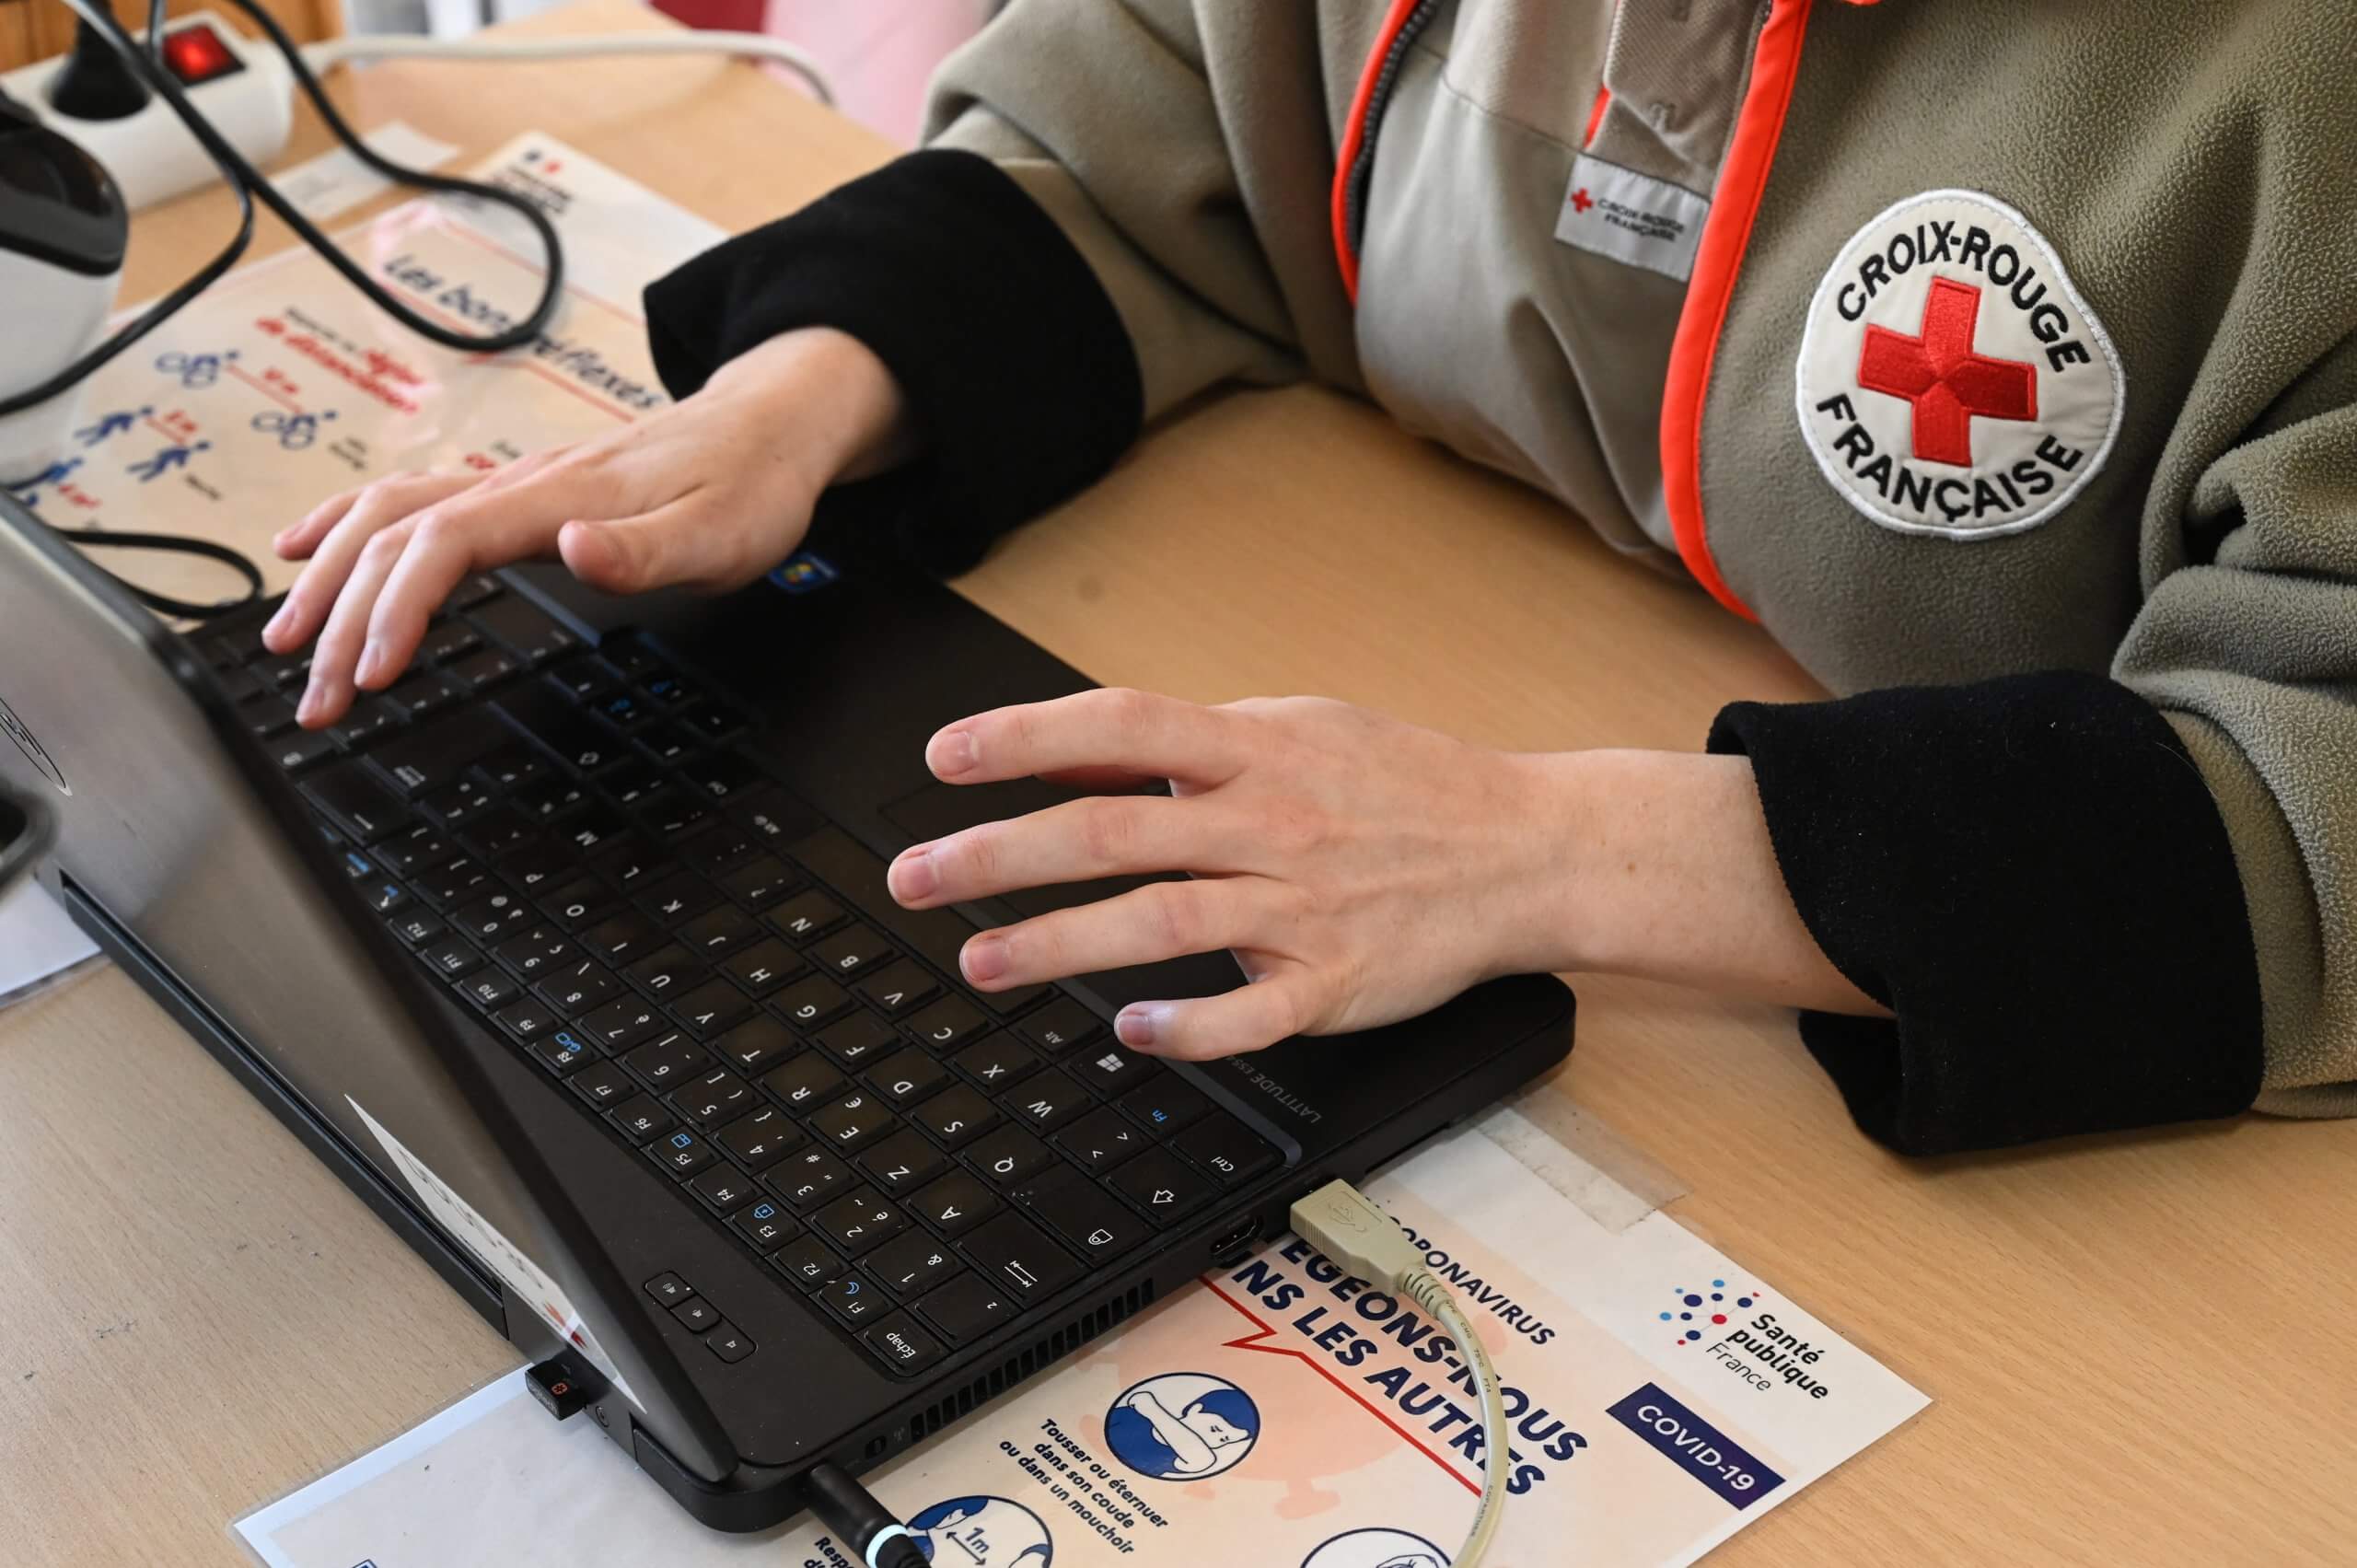 "A sophisticated cyber security attack against computer servers hosting information held by the International Committee of the Red Cross (ICRC) was detected this week," the Red Cross said